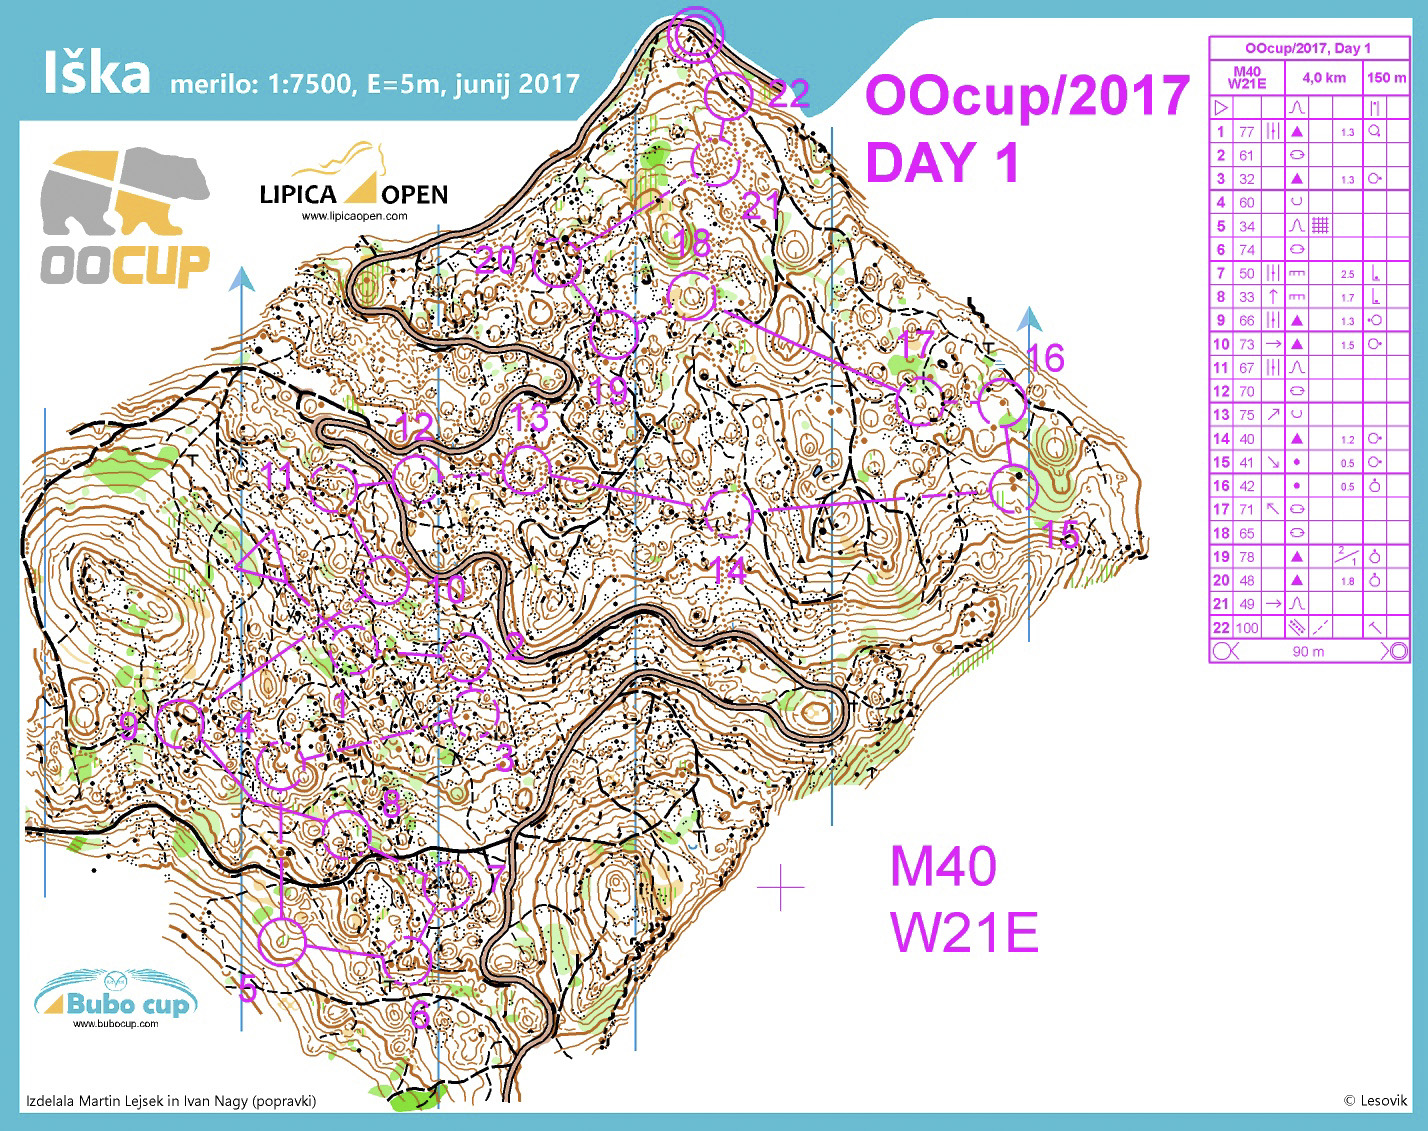 Oocup 2017 Day 1 (2017-07-24)